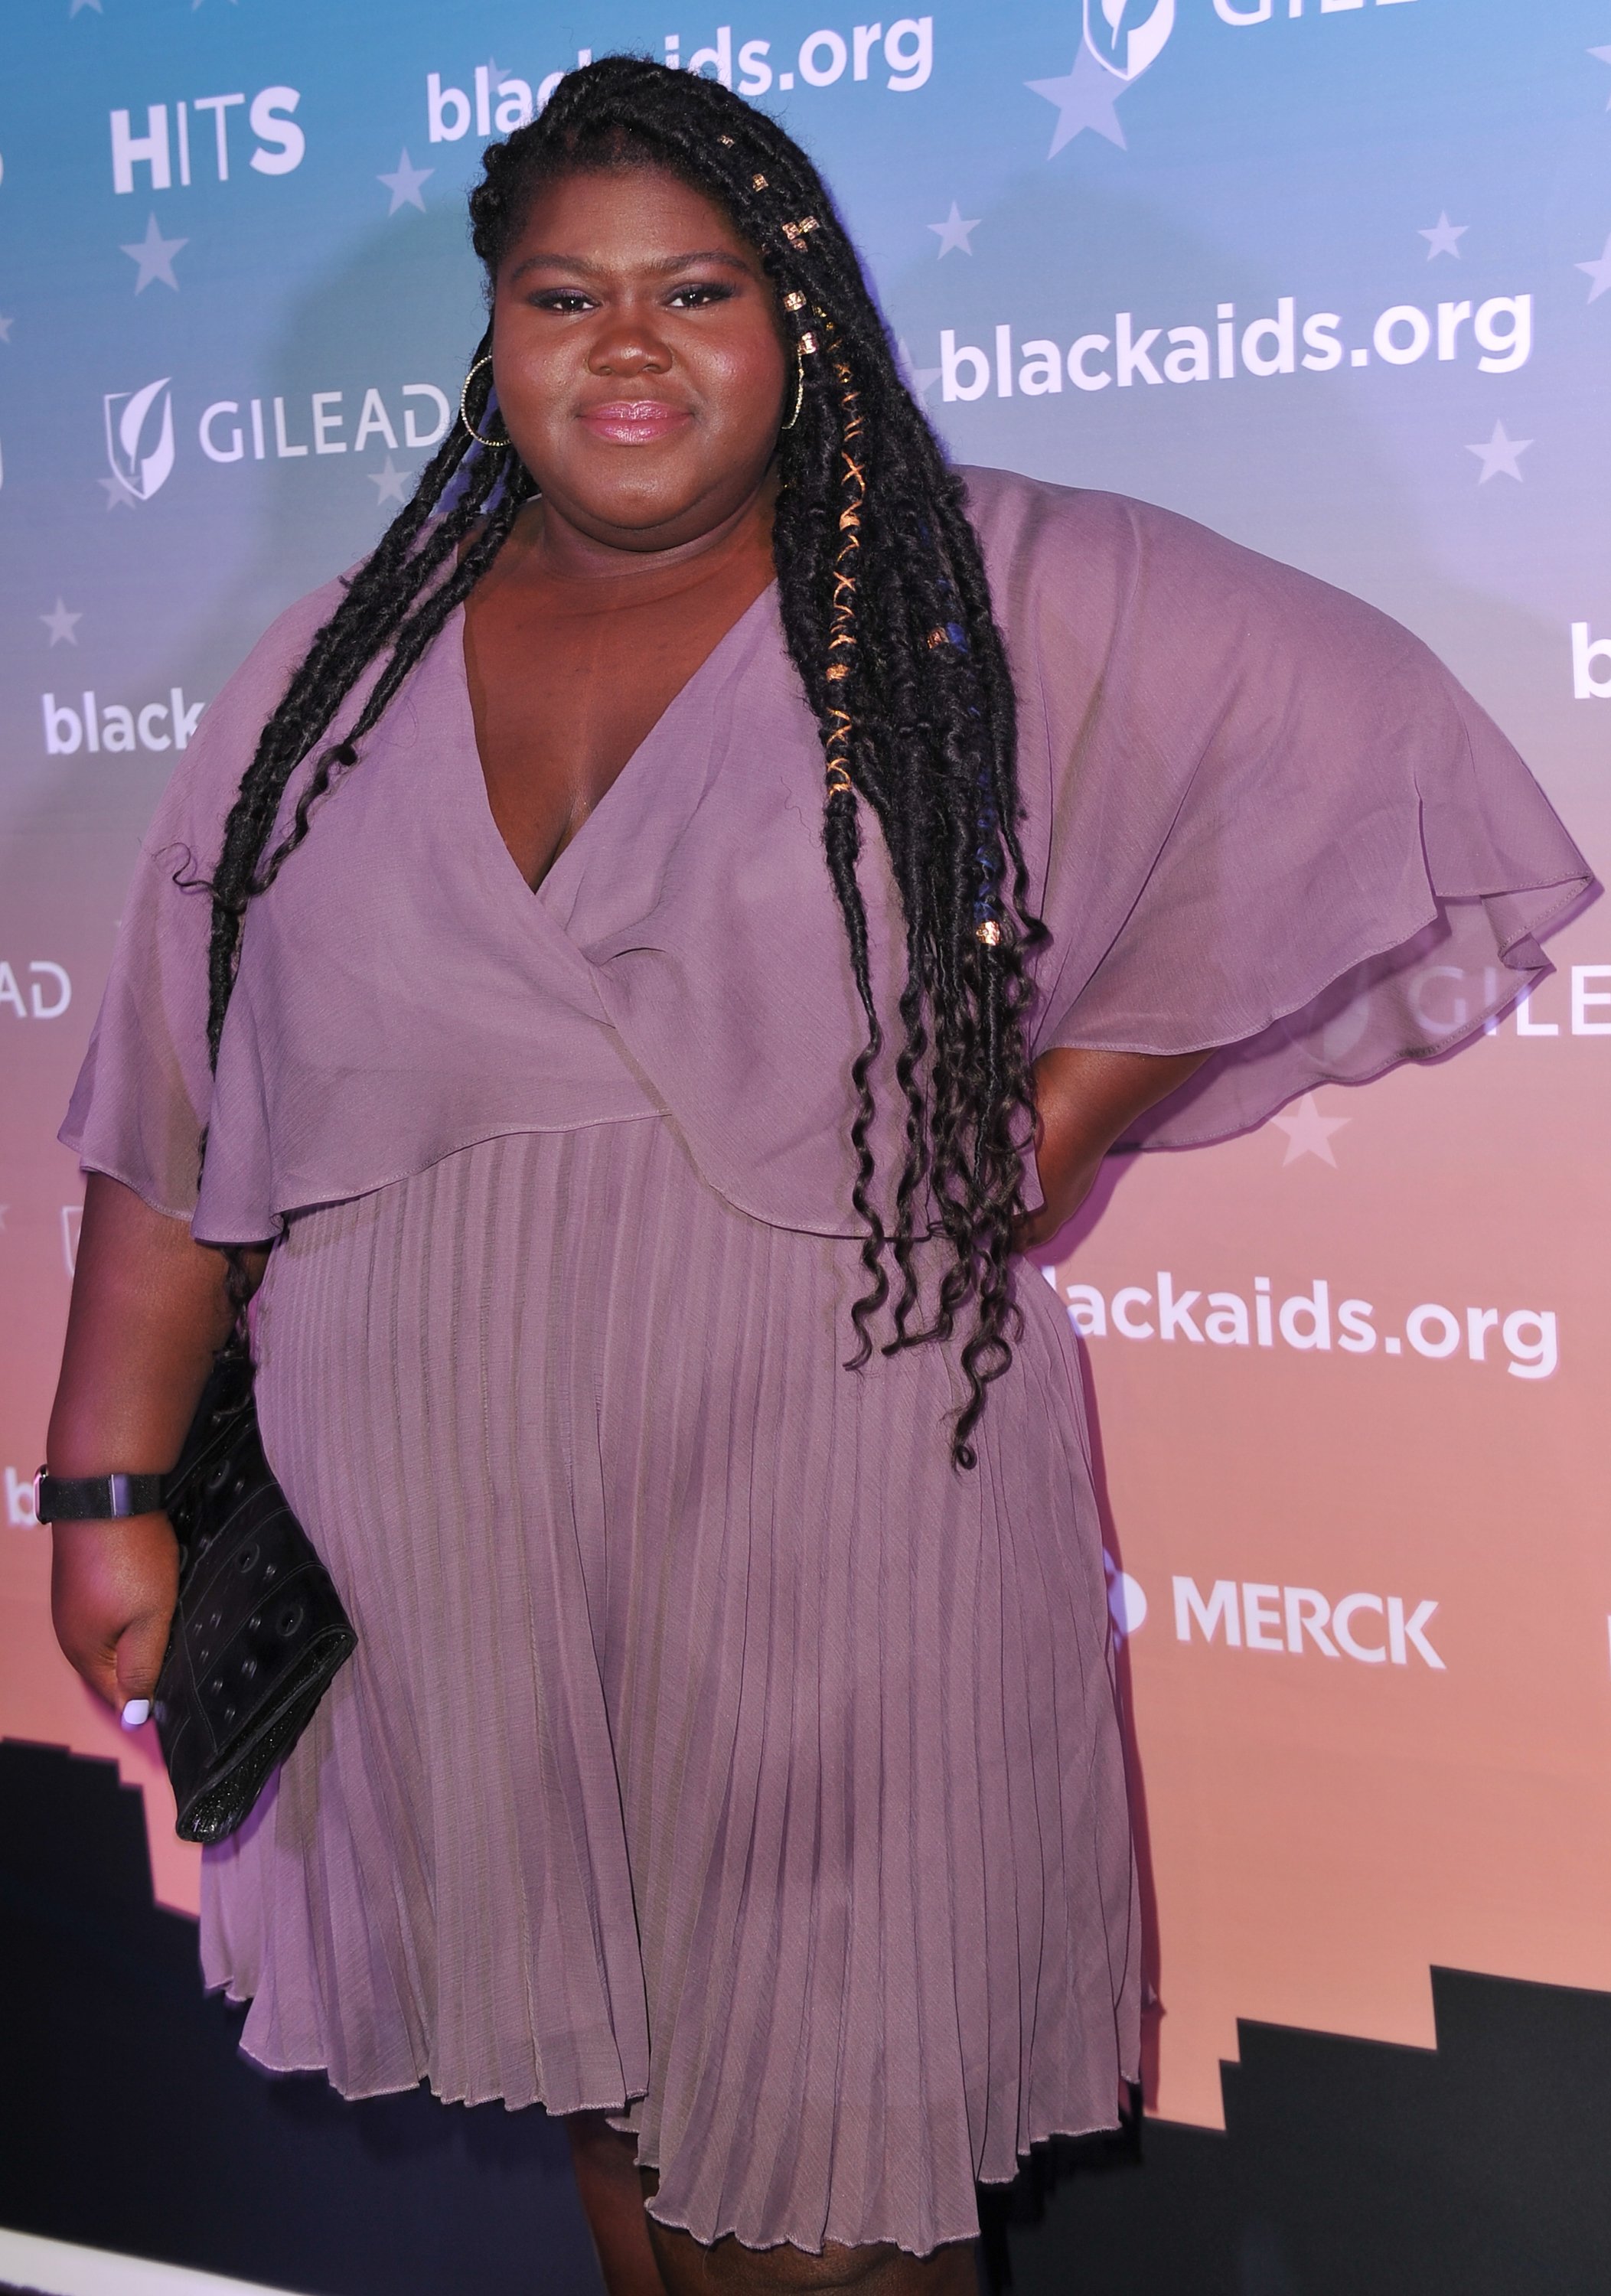 Gabourey Sidibe attends the 2018 Heroes in The Struggle Gala of the Black AIDS Institute at California African American Museum in Los Angeles on December 1, 2018. | Photo: Getty Images